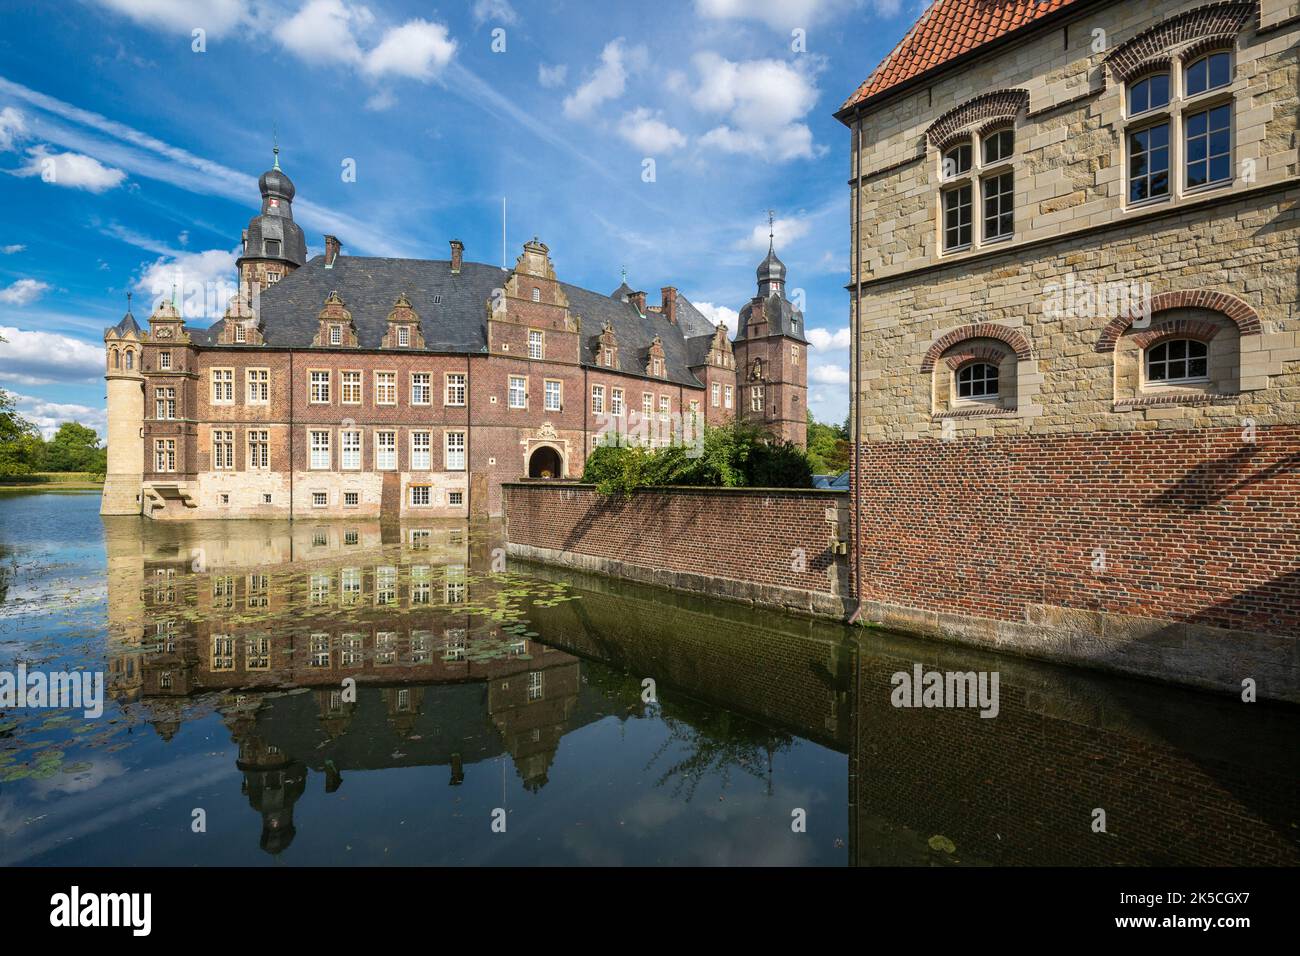 Germany, Rosendahl, Baumberge, Westmuensterland, Muensterland, Westphalia, North Rhine-Westphalia, Rosendahl-Darfeld, Darfeld Castle, former knight's seat, moat, moats, gatehouse of the outer castle and gallery building Stock Photo